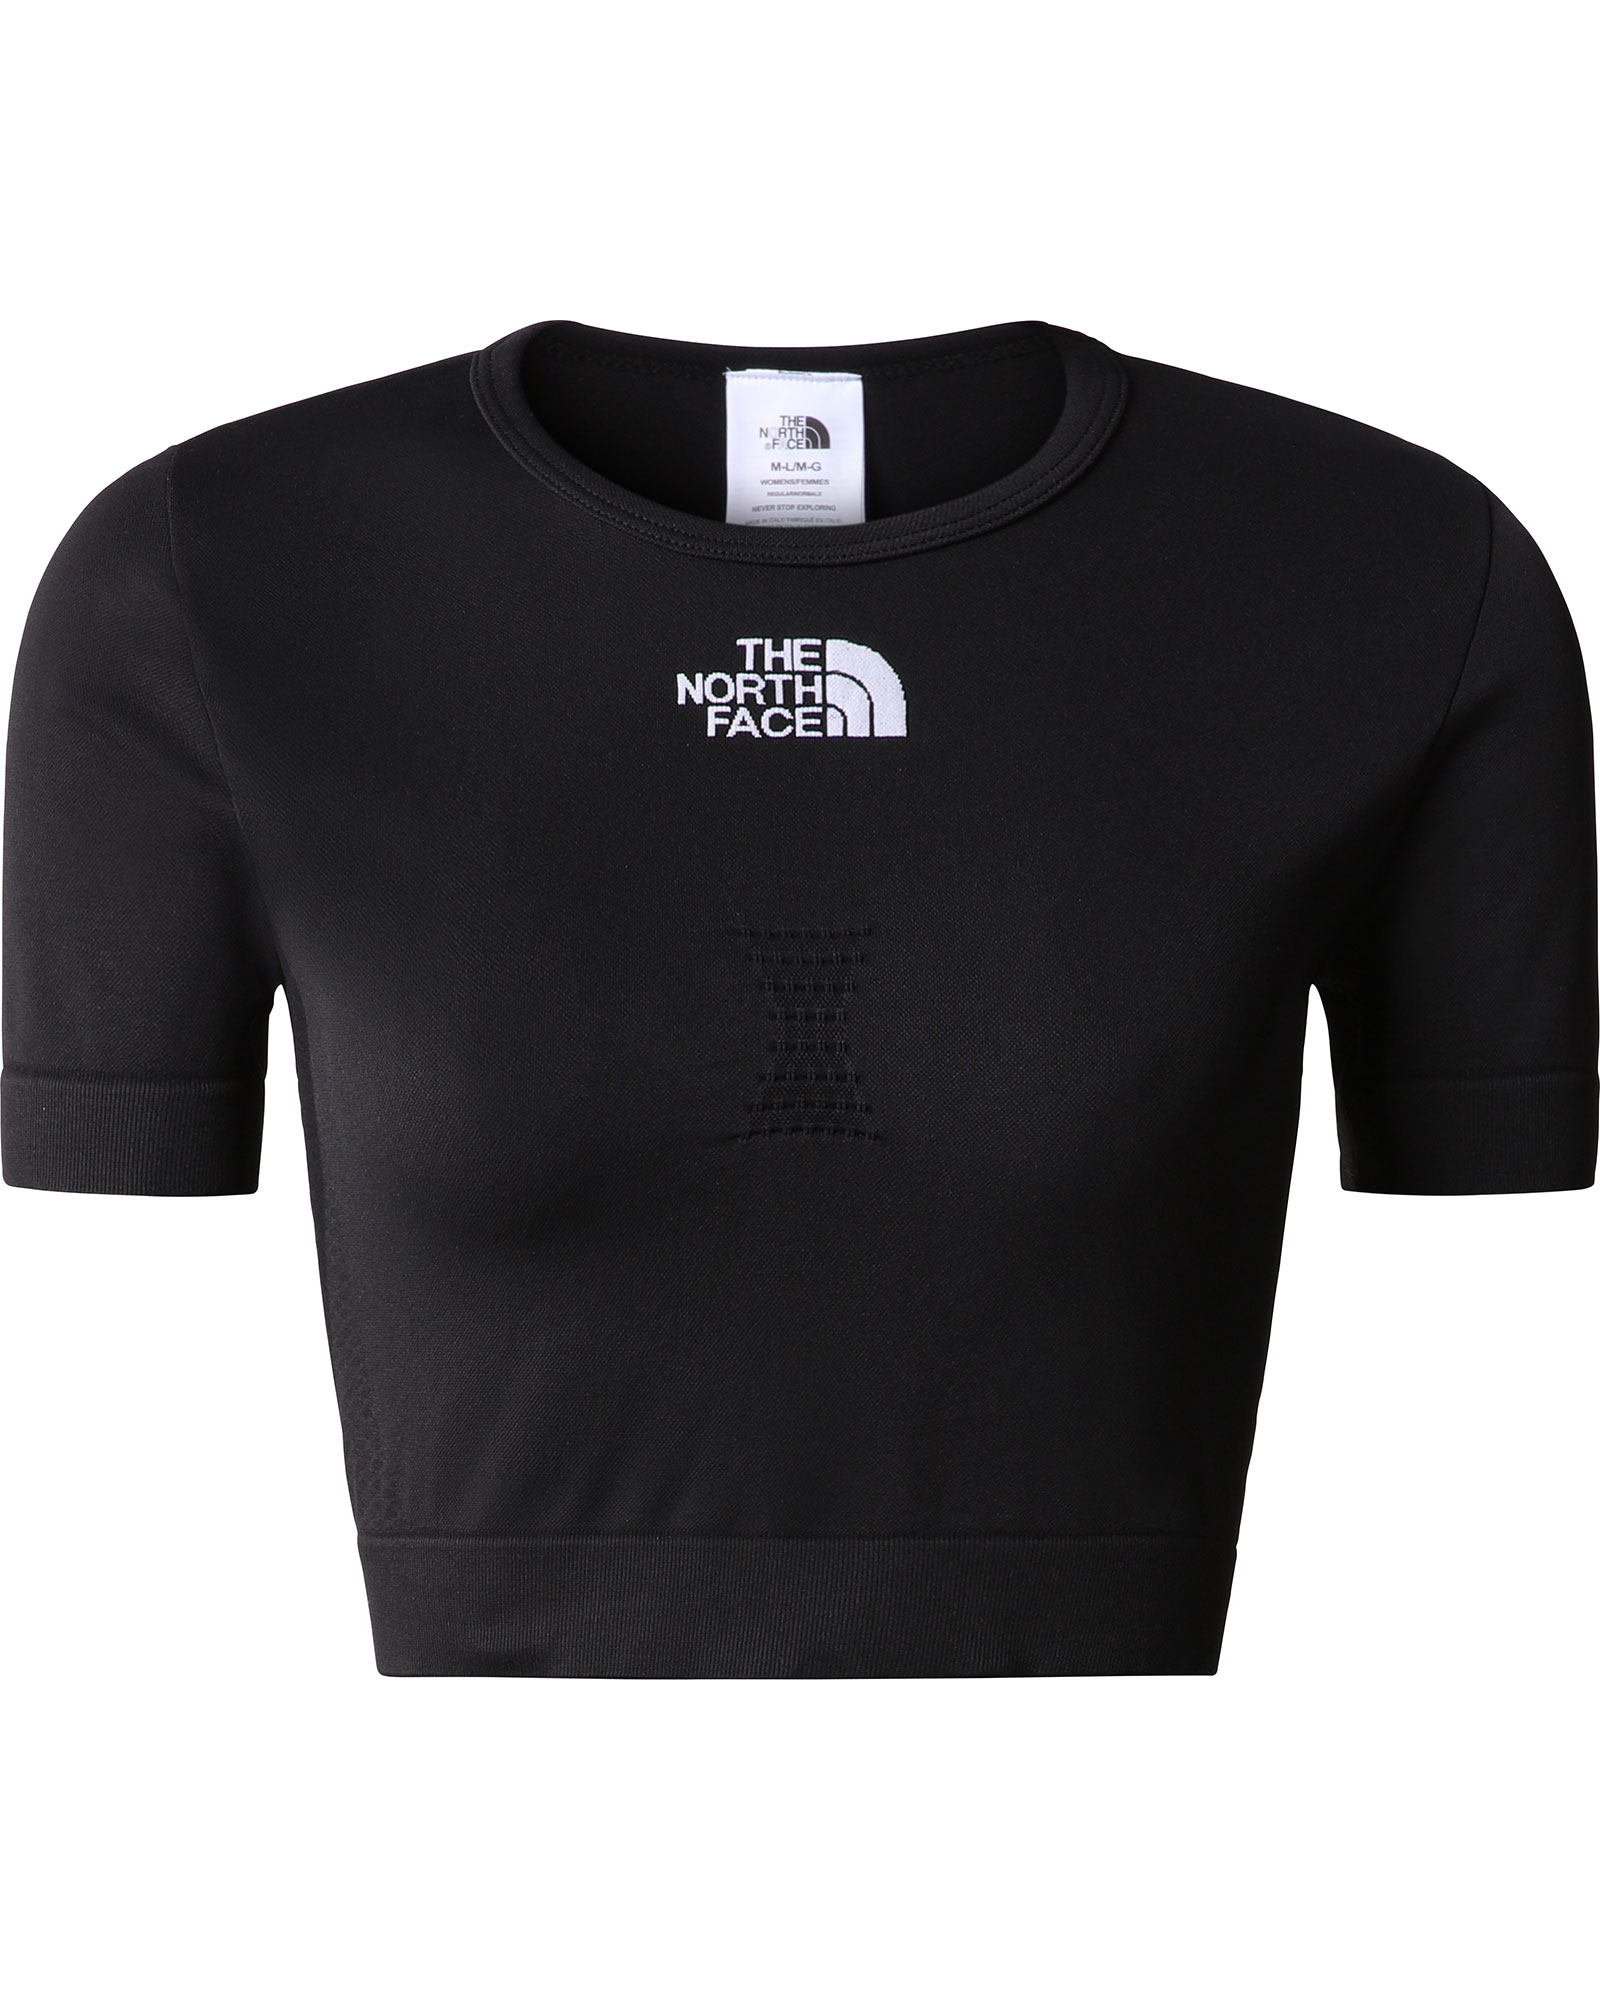 The North Face Women’s New Seamless T Shirt - TNF Black S/M